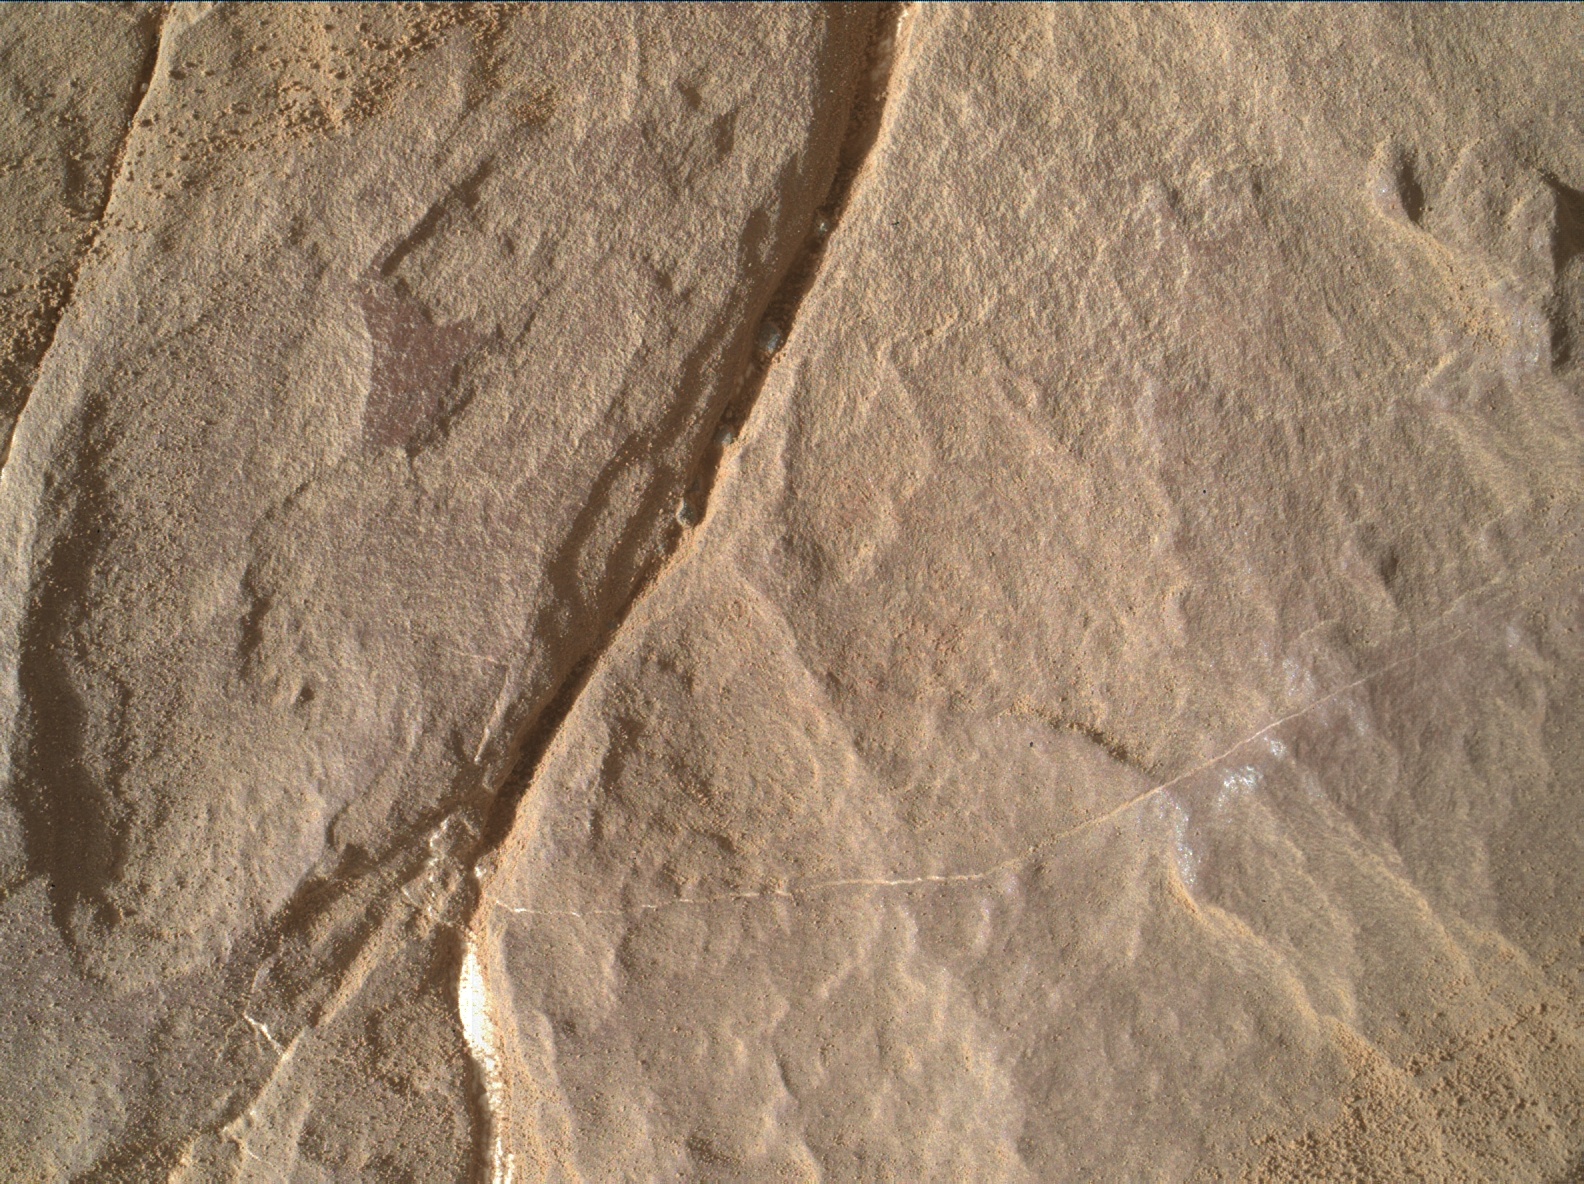 Nasa's Mars rover Curiosity acquired this image using its Mars Hand Lens Imager (MAHLI) on Sol 2000